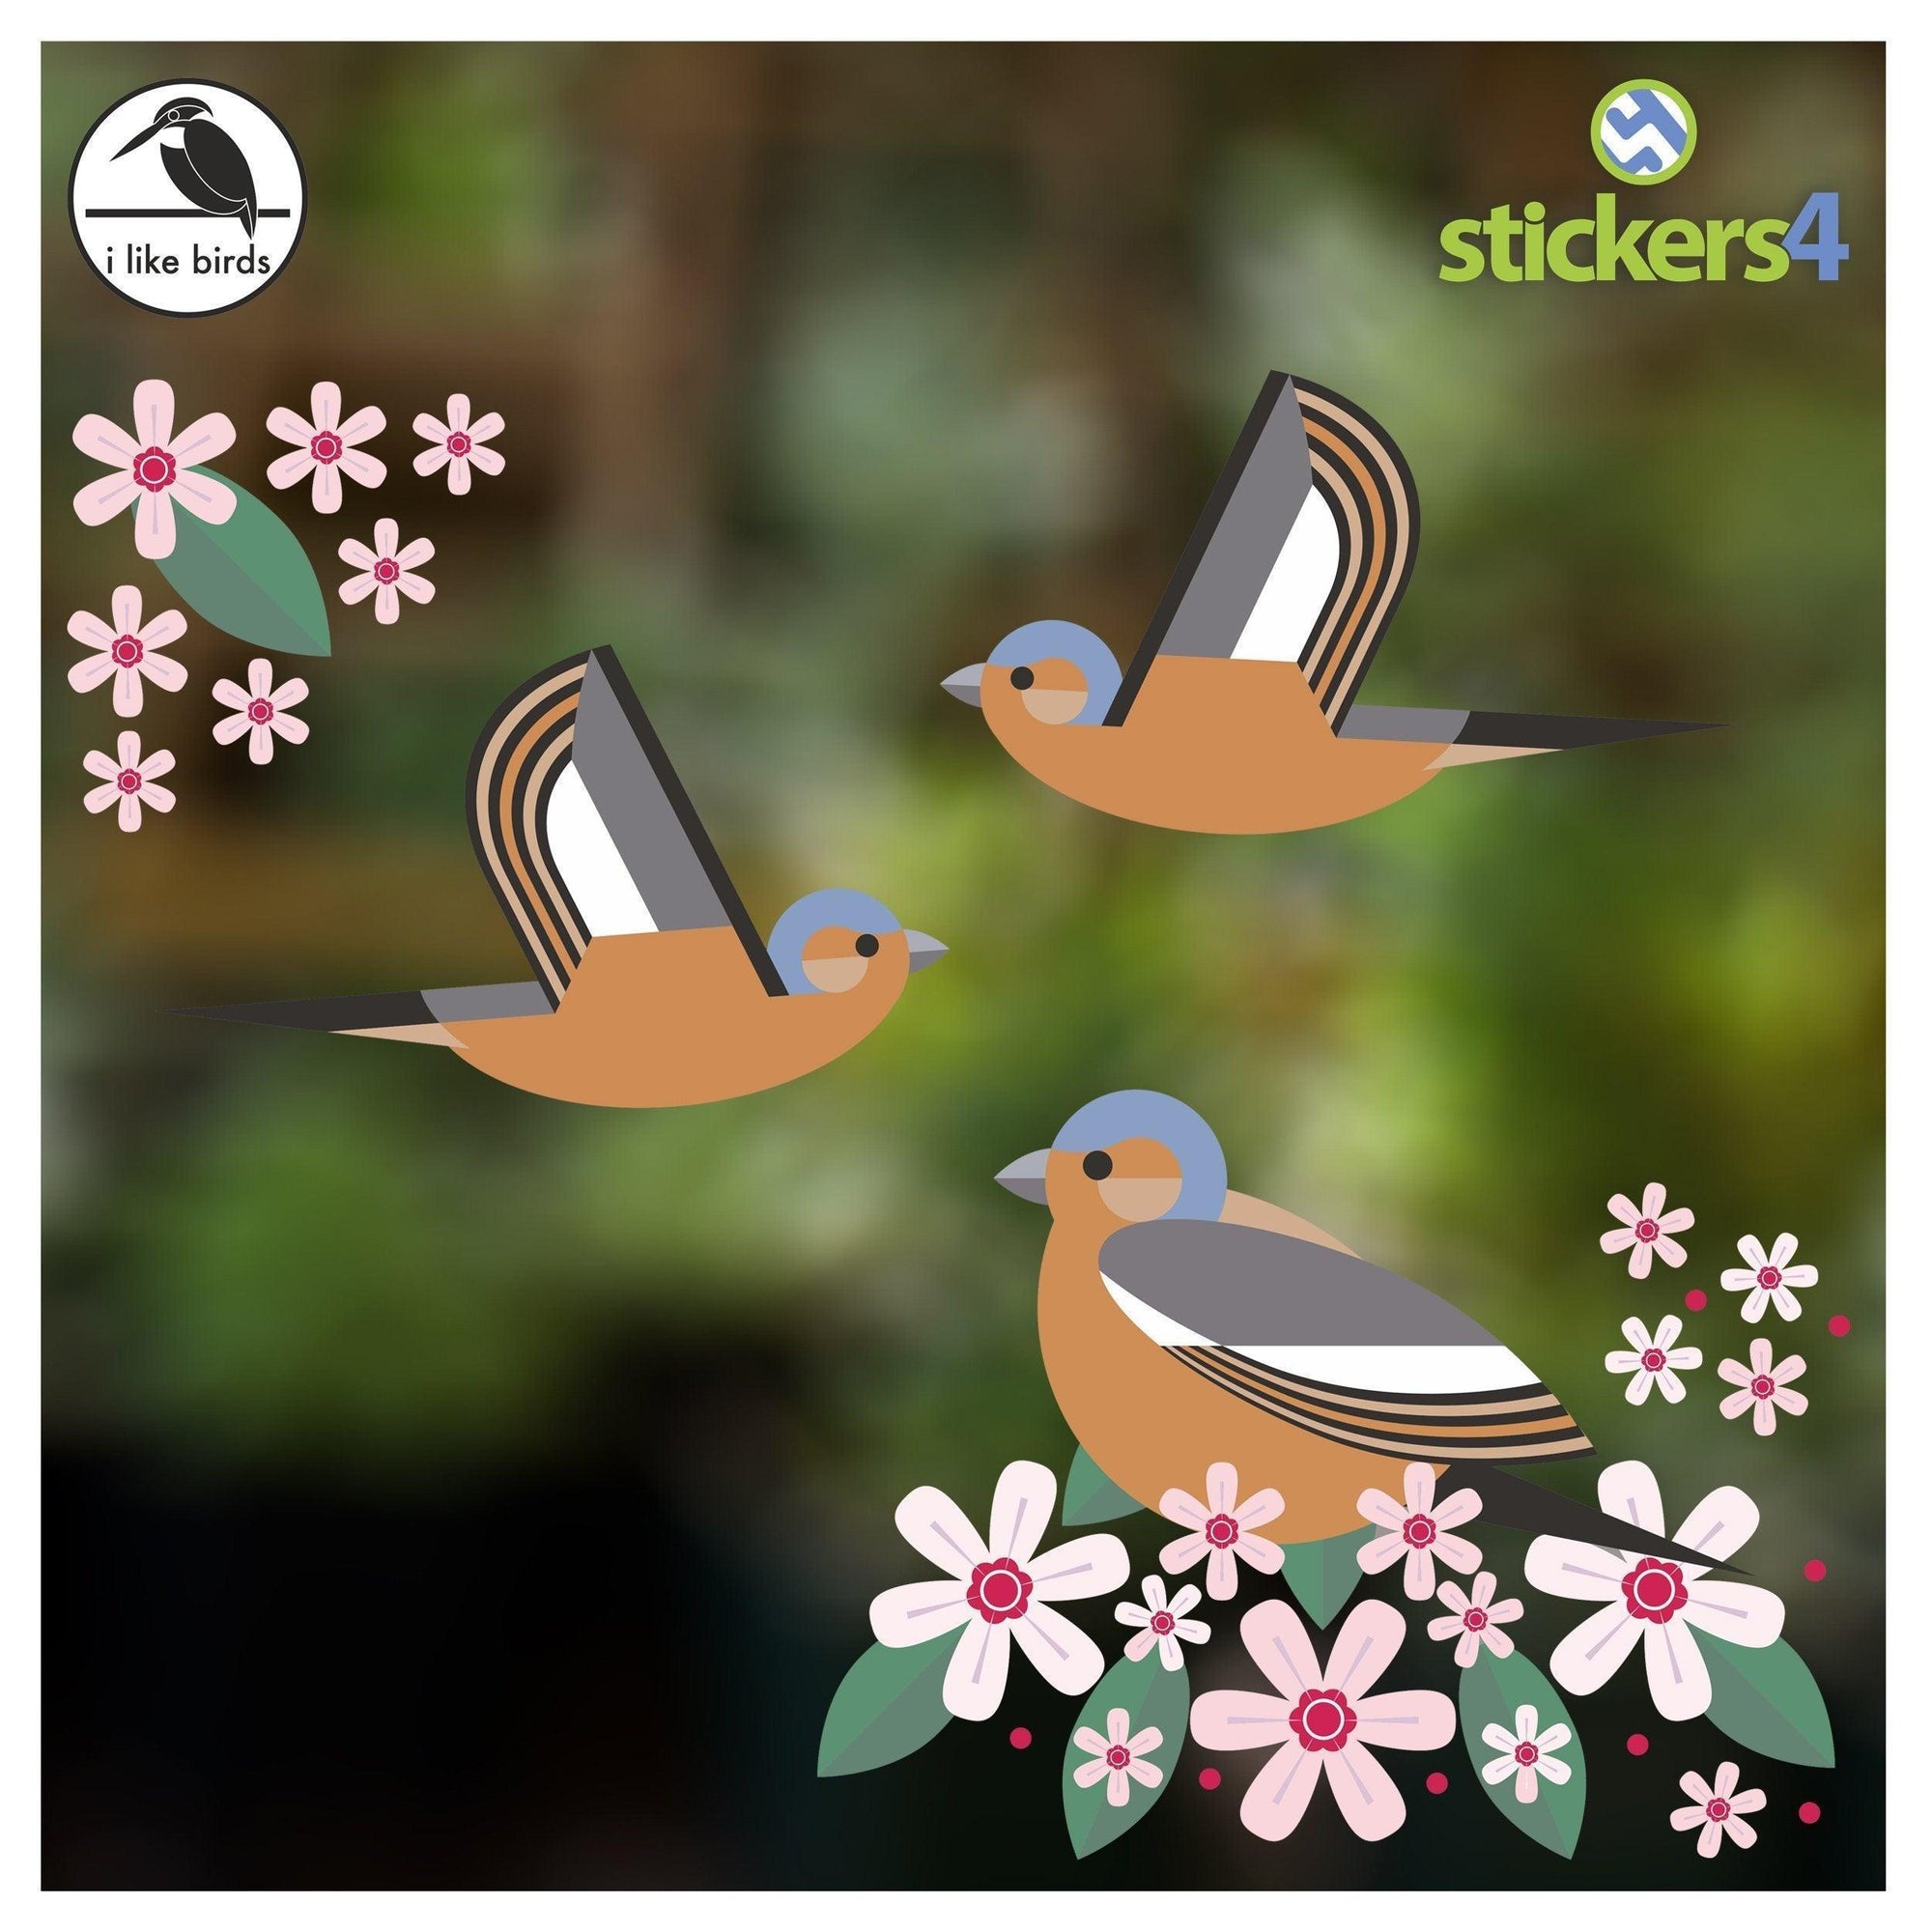 Birds & Blooms - Chaffinch set of static cling window stickers Decorative Bird Strike Prevention